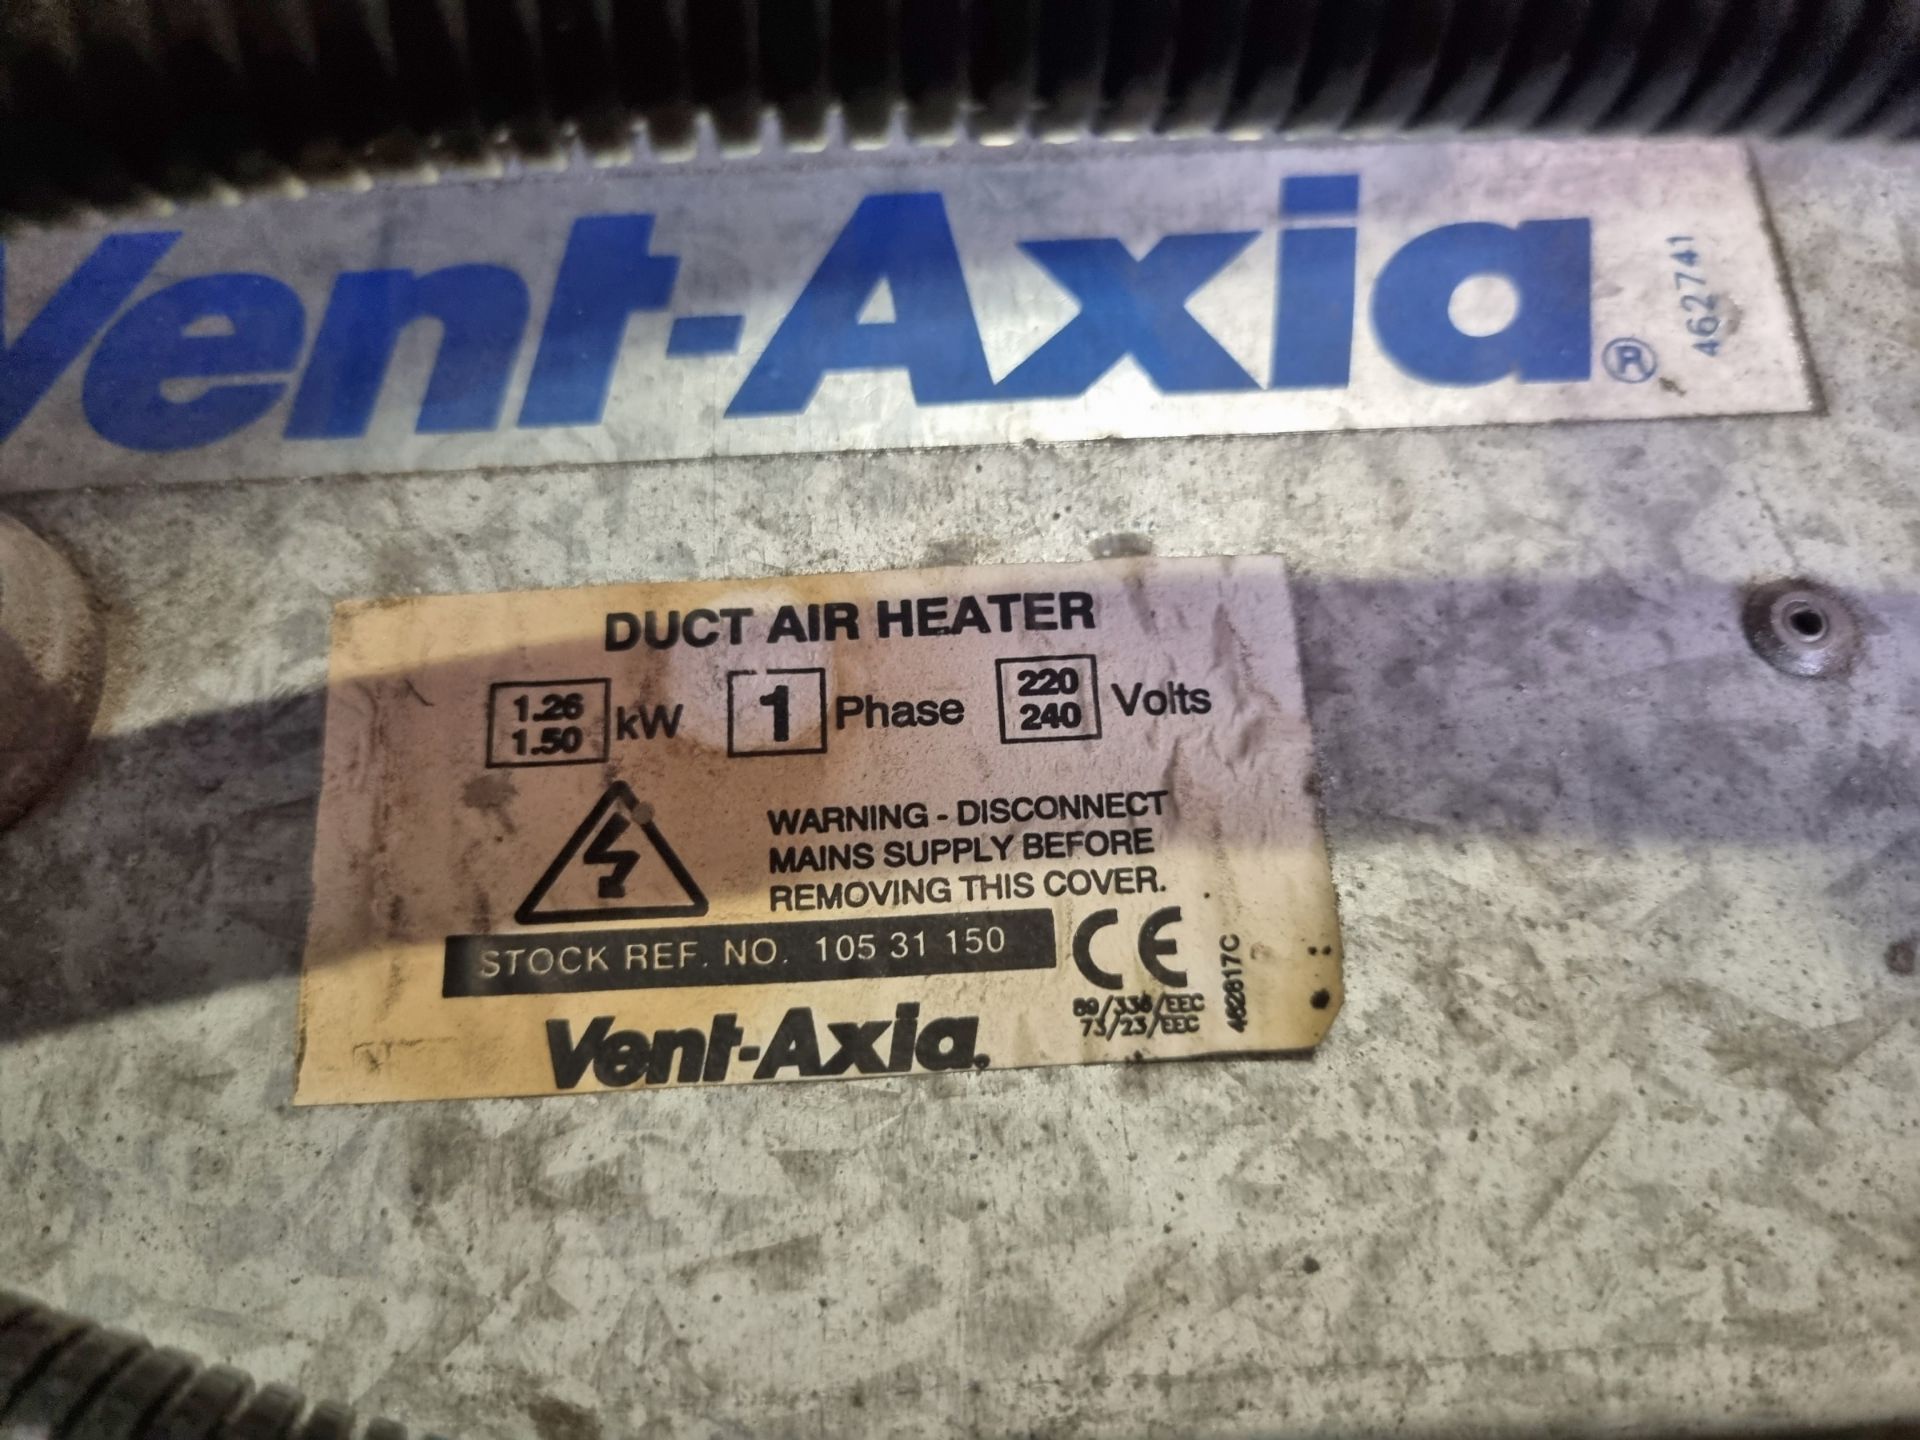 Vent-Axia duct air heater unit - Image 5 of 5